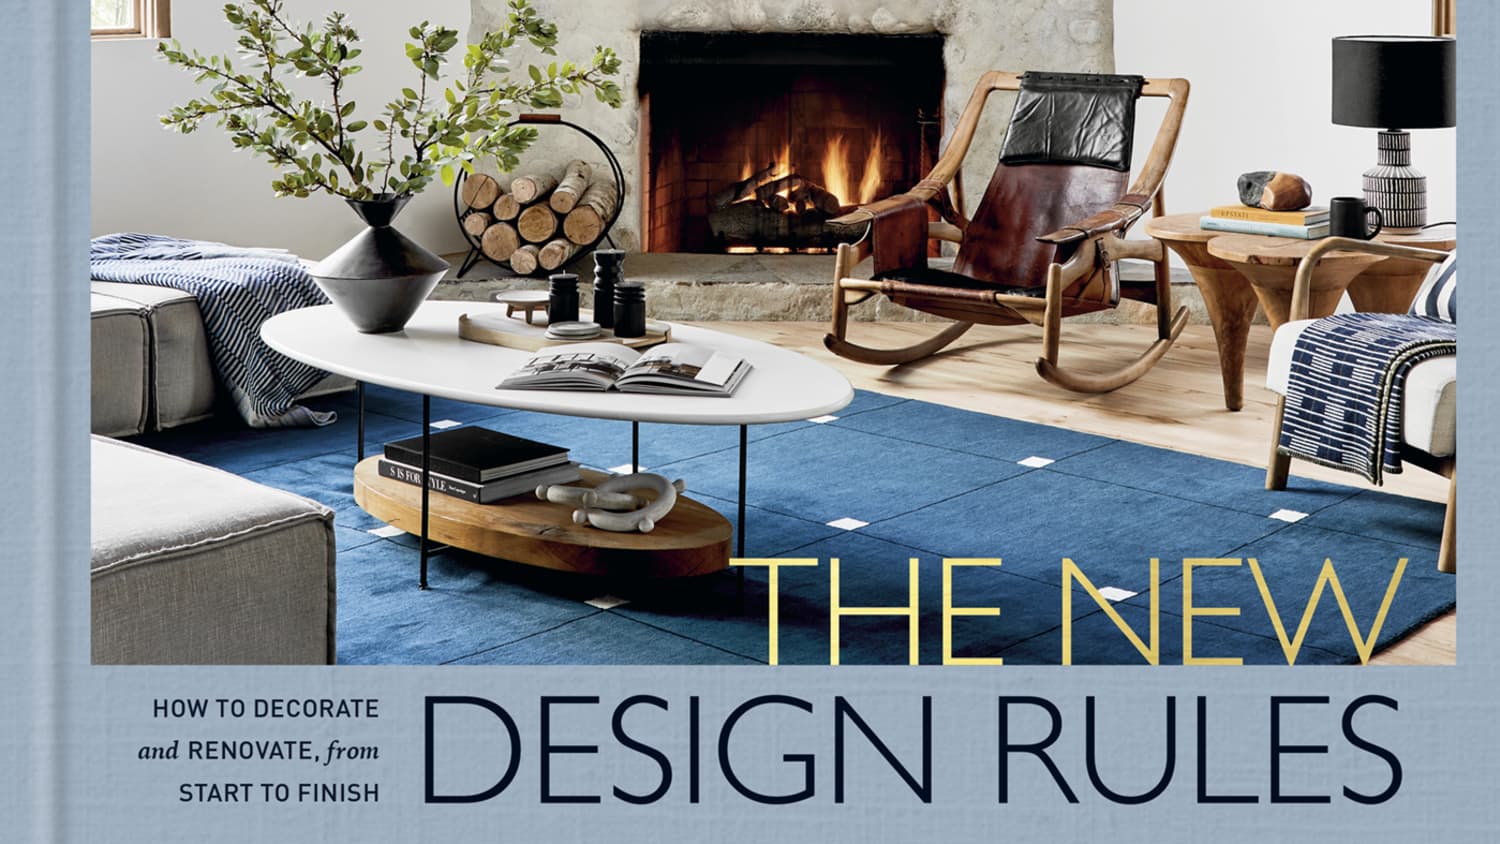 The New Design Rules by Emily Henderson, Jessica Cumberbatch Anderson:  9781984826480